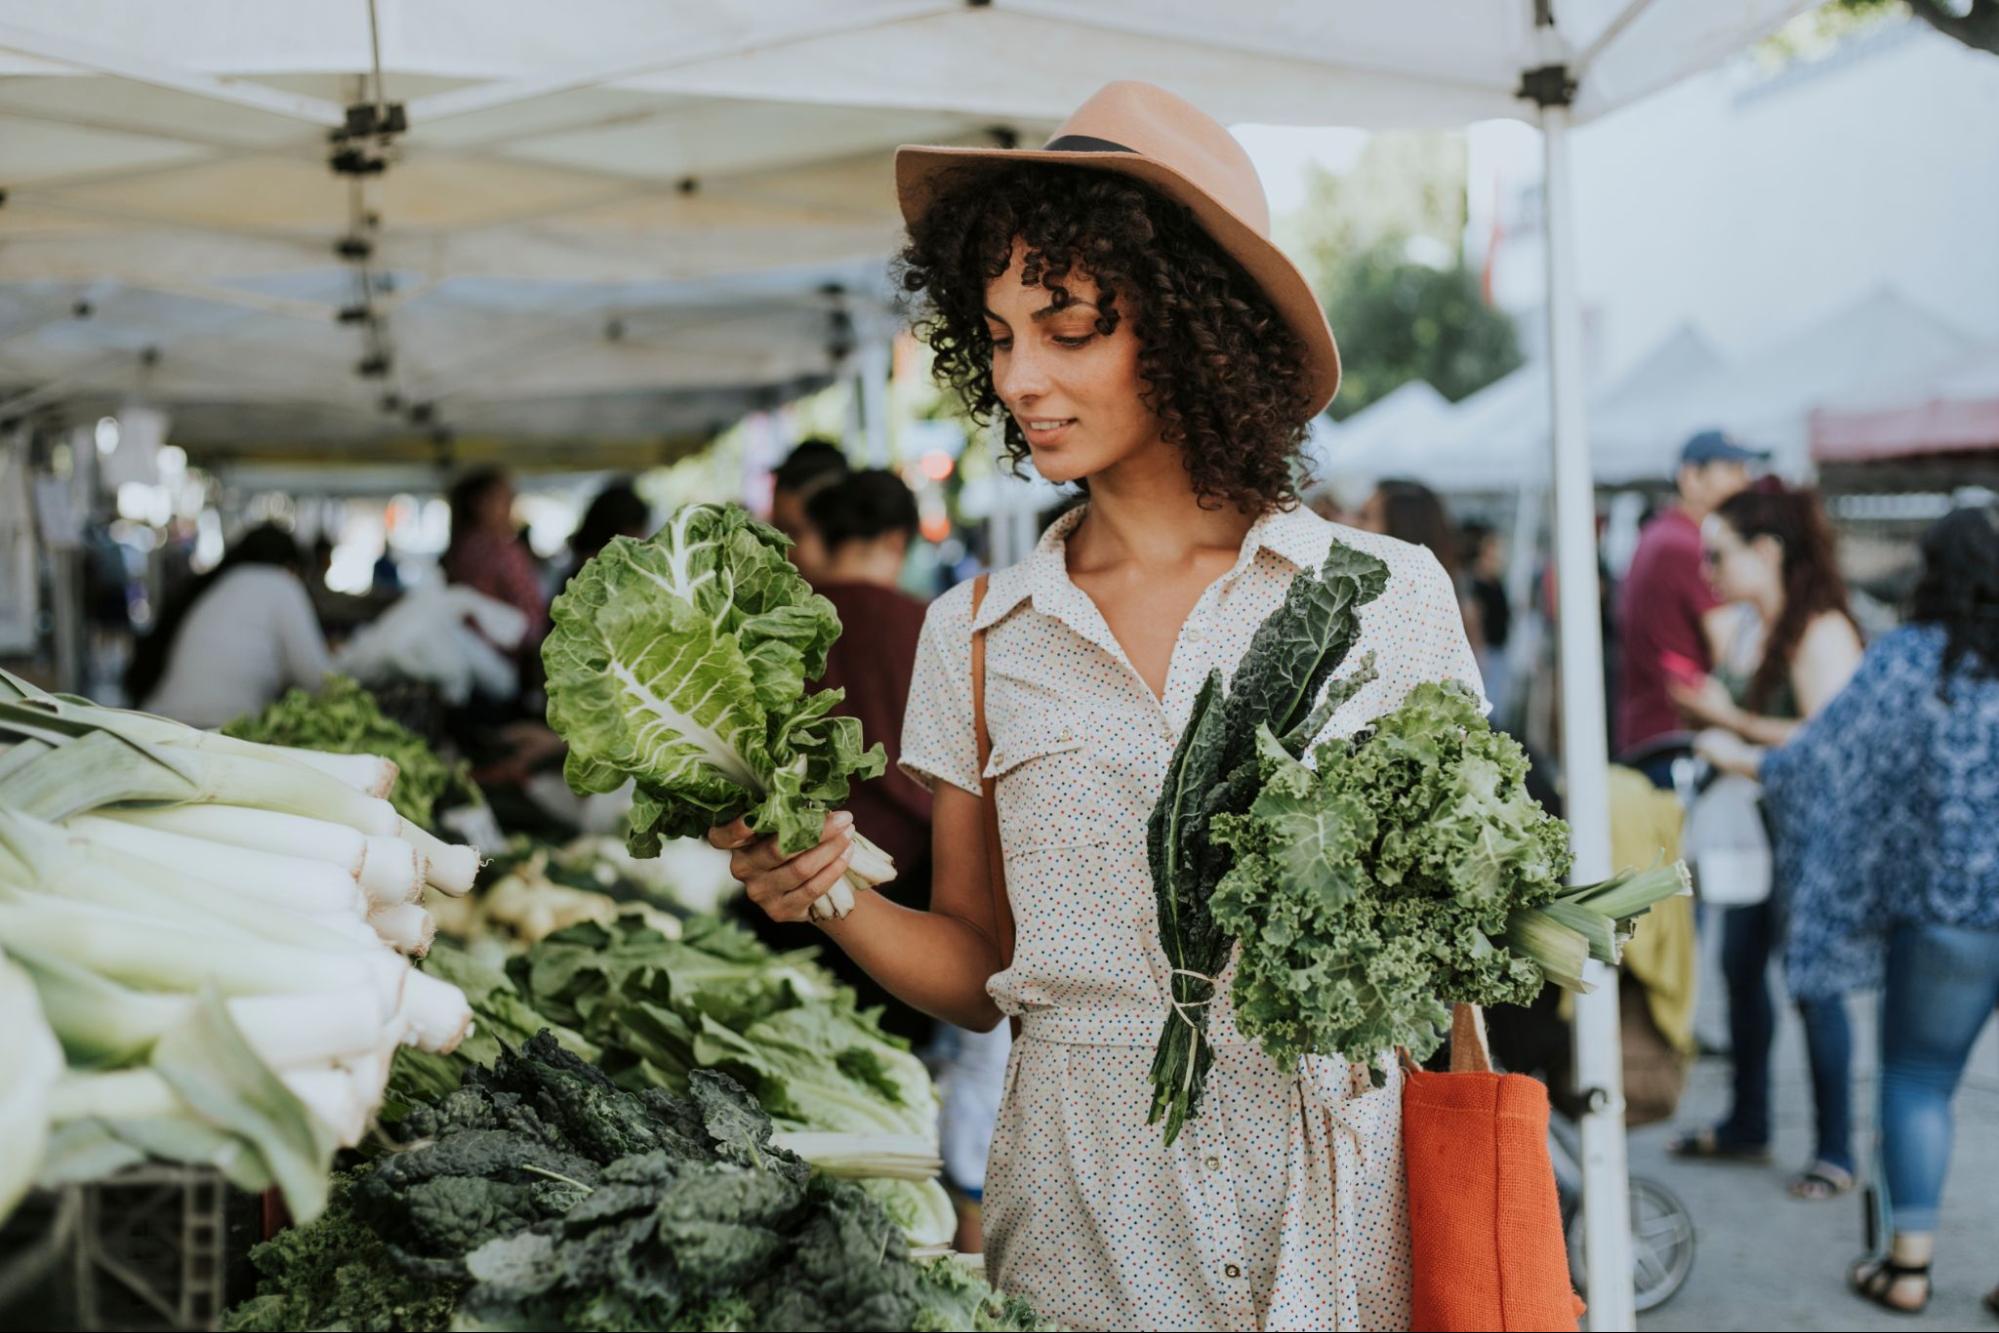 Woman Shopping in a farmers market for kale ©Rawpixel.com